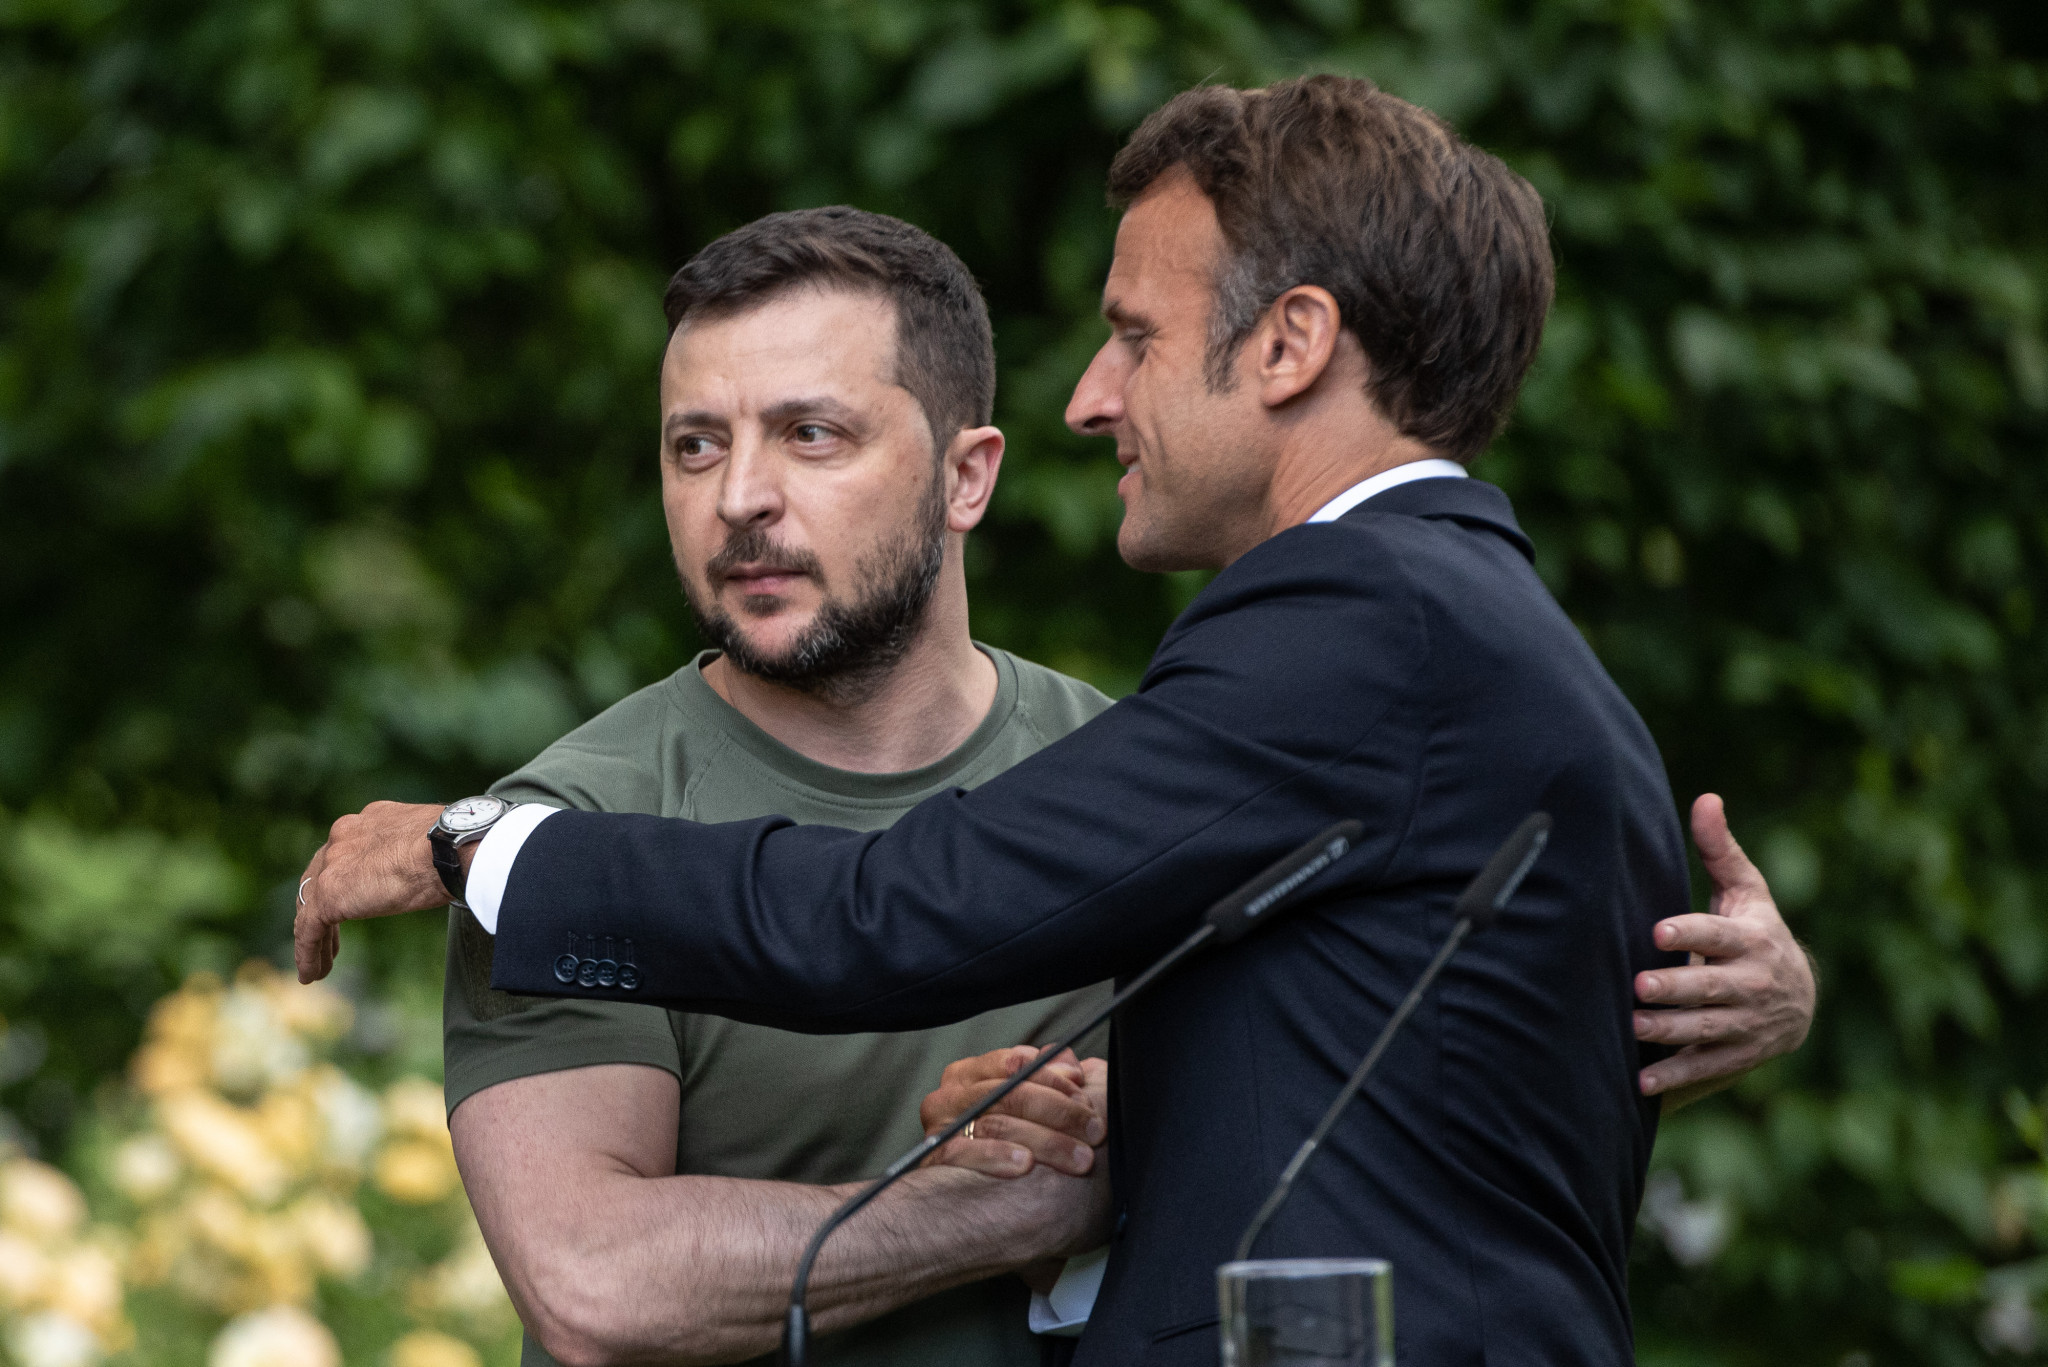 Ukrainian President Volodymyr Zelenskyy, left, told French President Emmanuel Macron, right, that "Russia should have no place" at Paris 2024 ©Getty Images